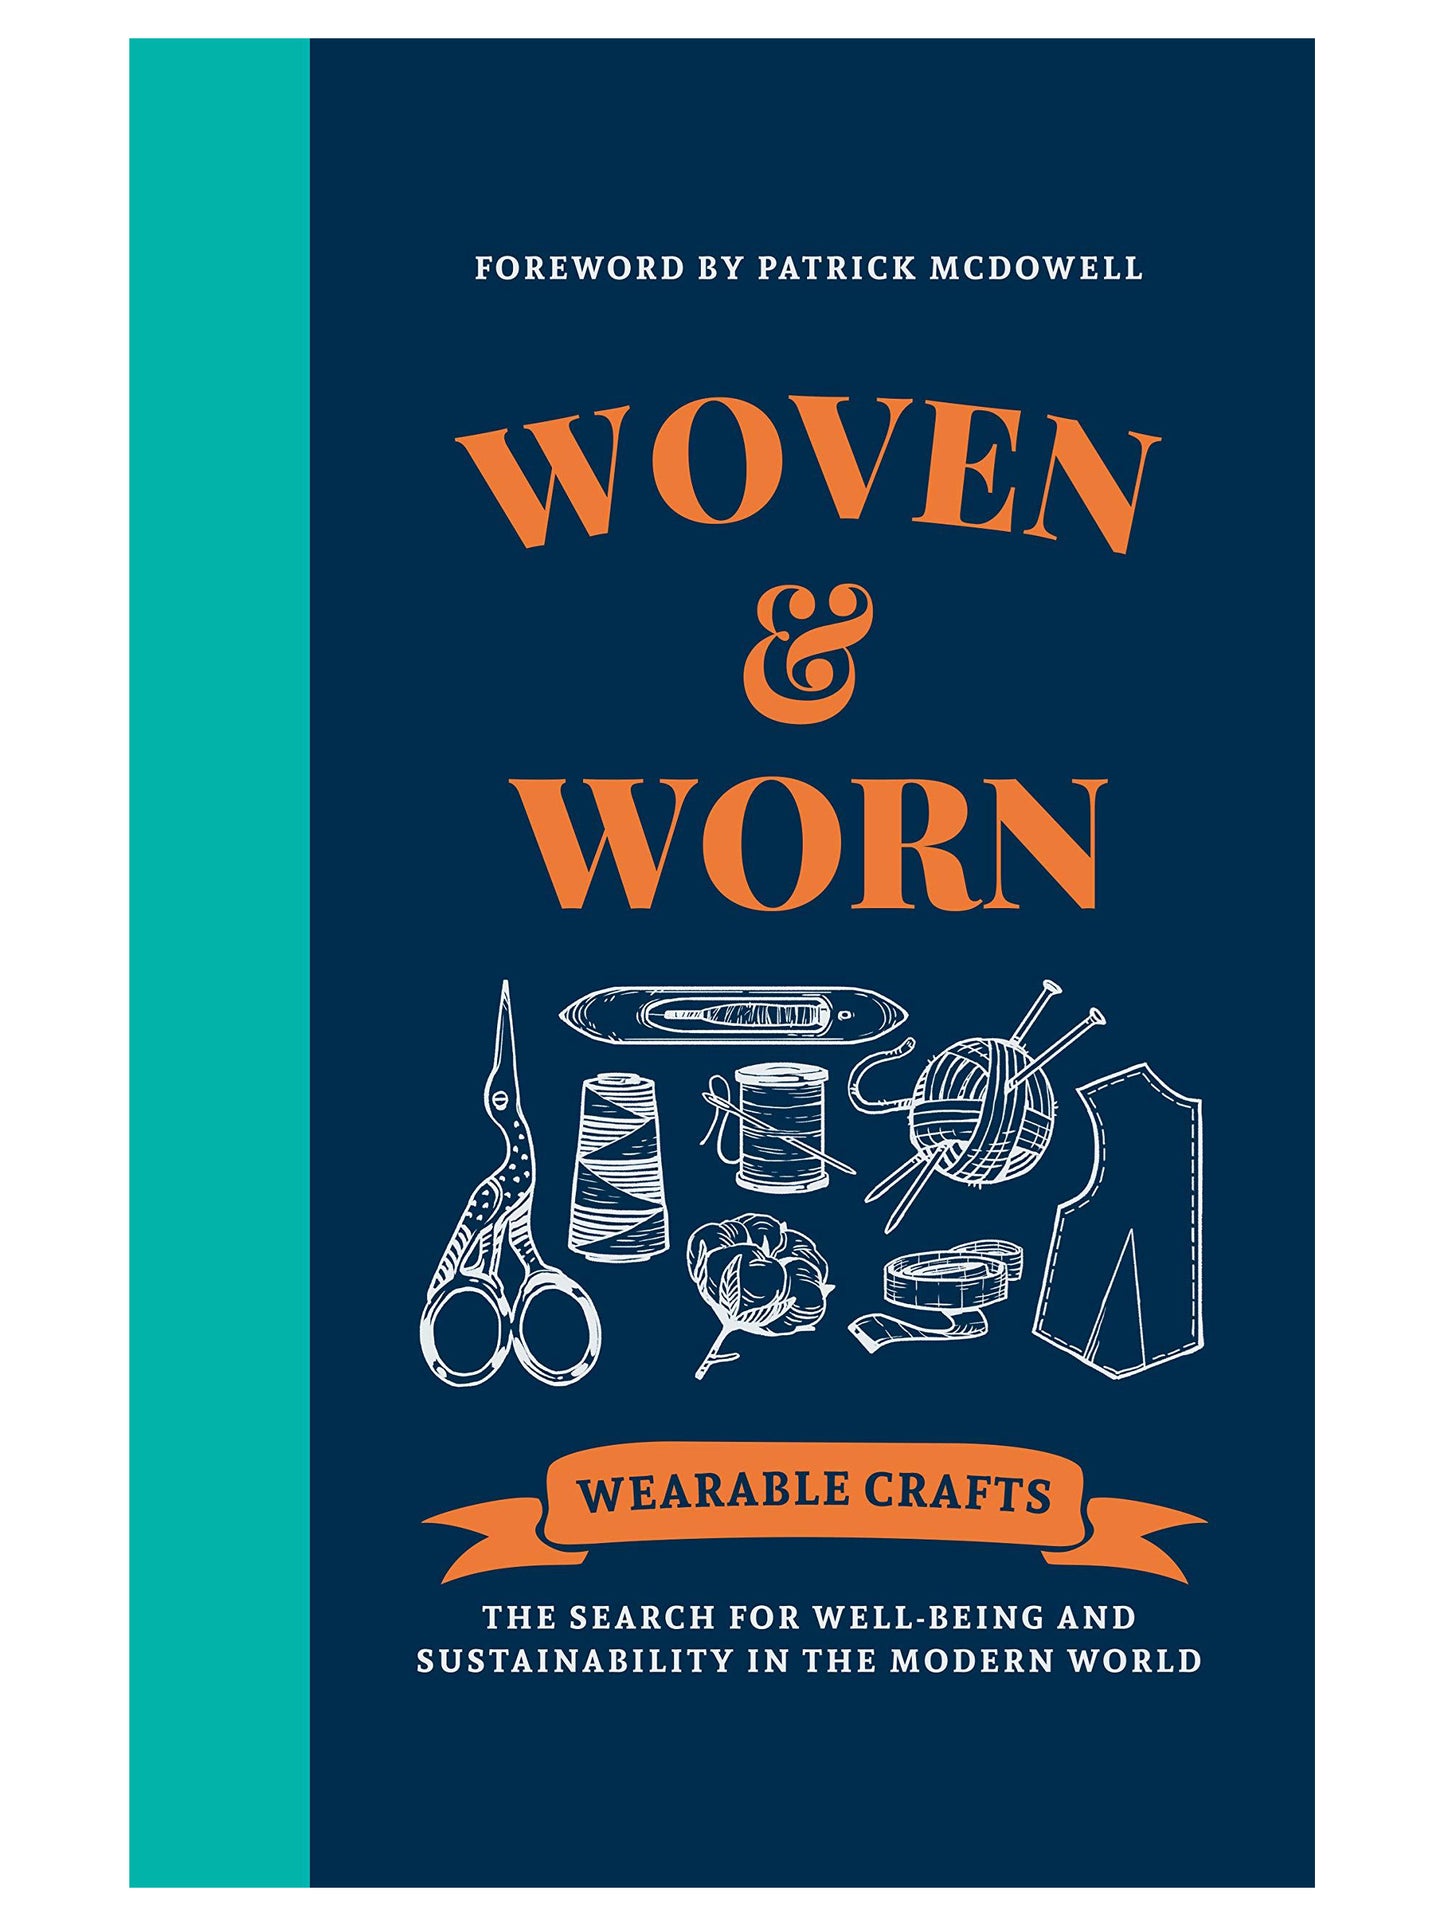 Woven & Worn: Wearable Crafts